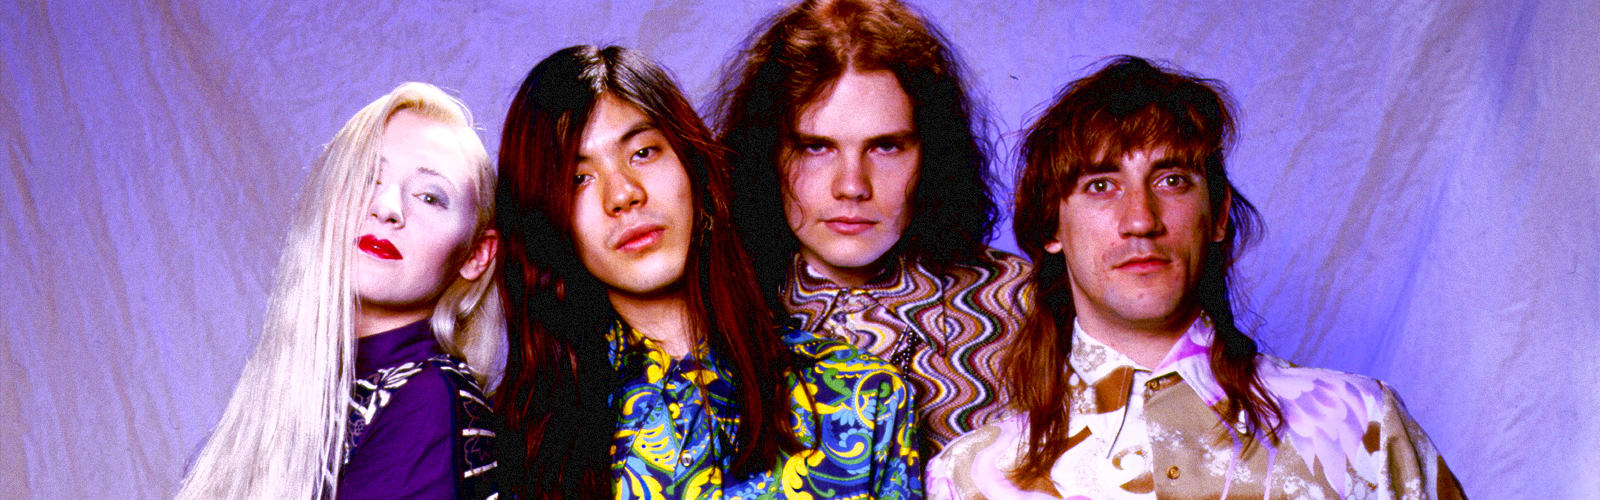 The Best Smashing Pumpkins Songs, Ranked